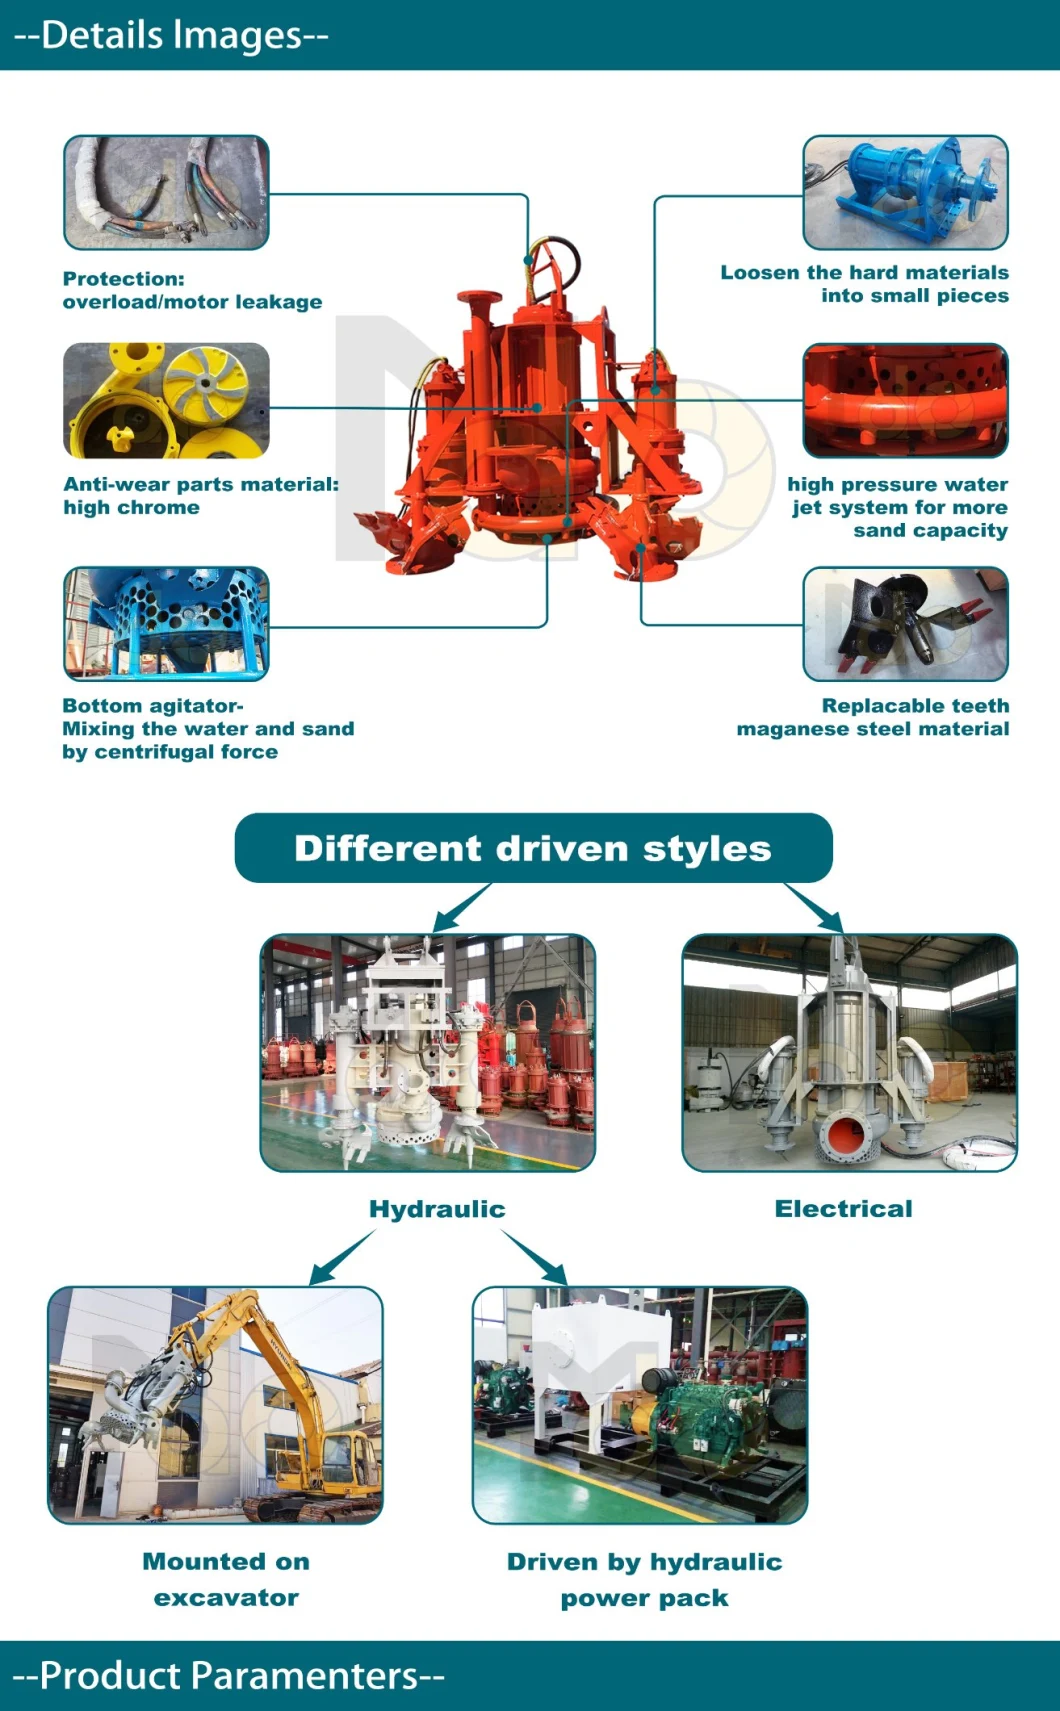 Zero Risk Bare Shaft Vertical Submersible Vertical Shaft Driven Sump Slurry Pump for Industry